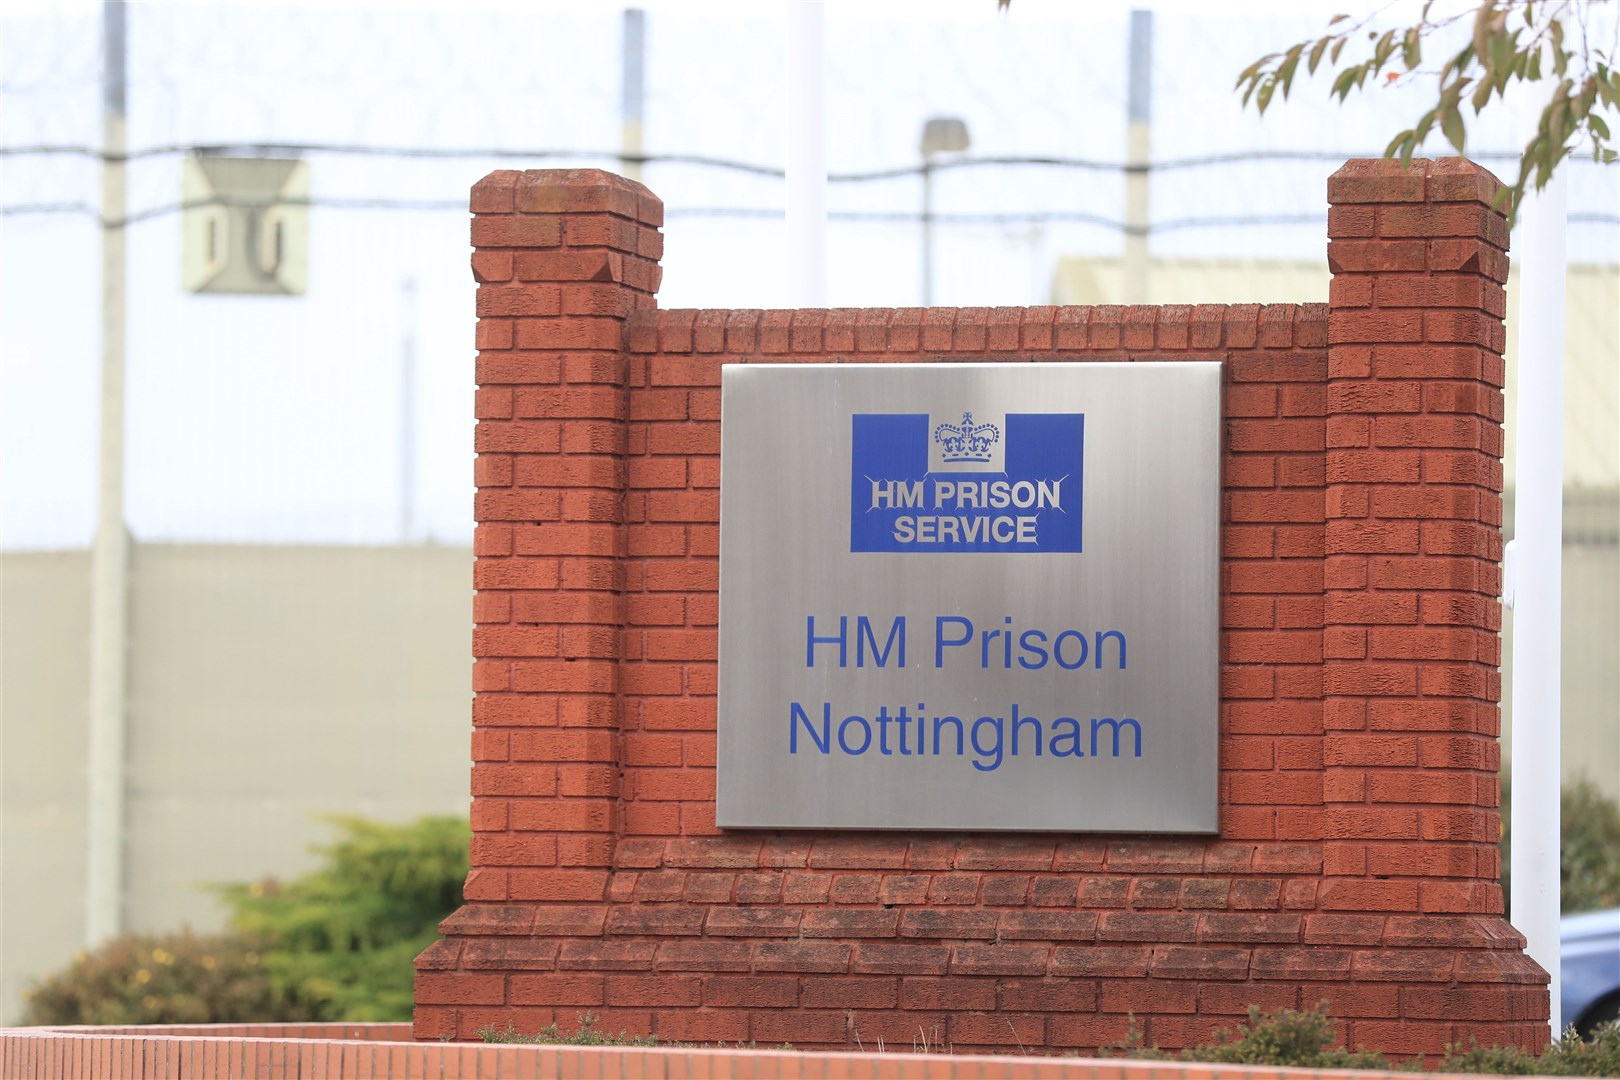 Nottingham, the first prison to receive a UN in January 2018, was rated as good (PA)